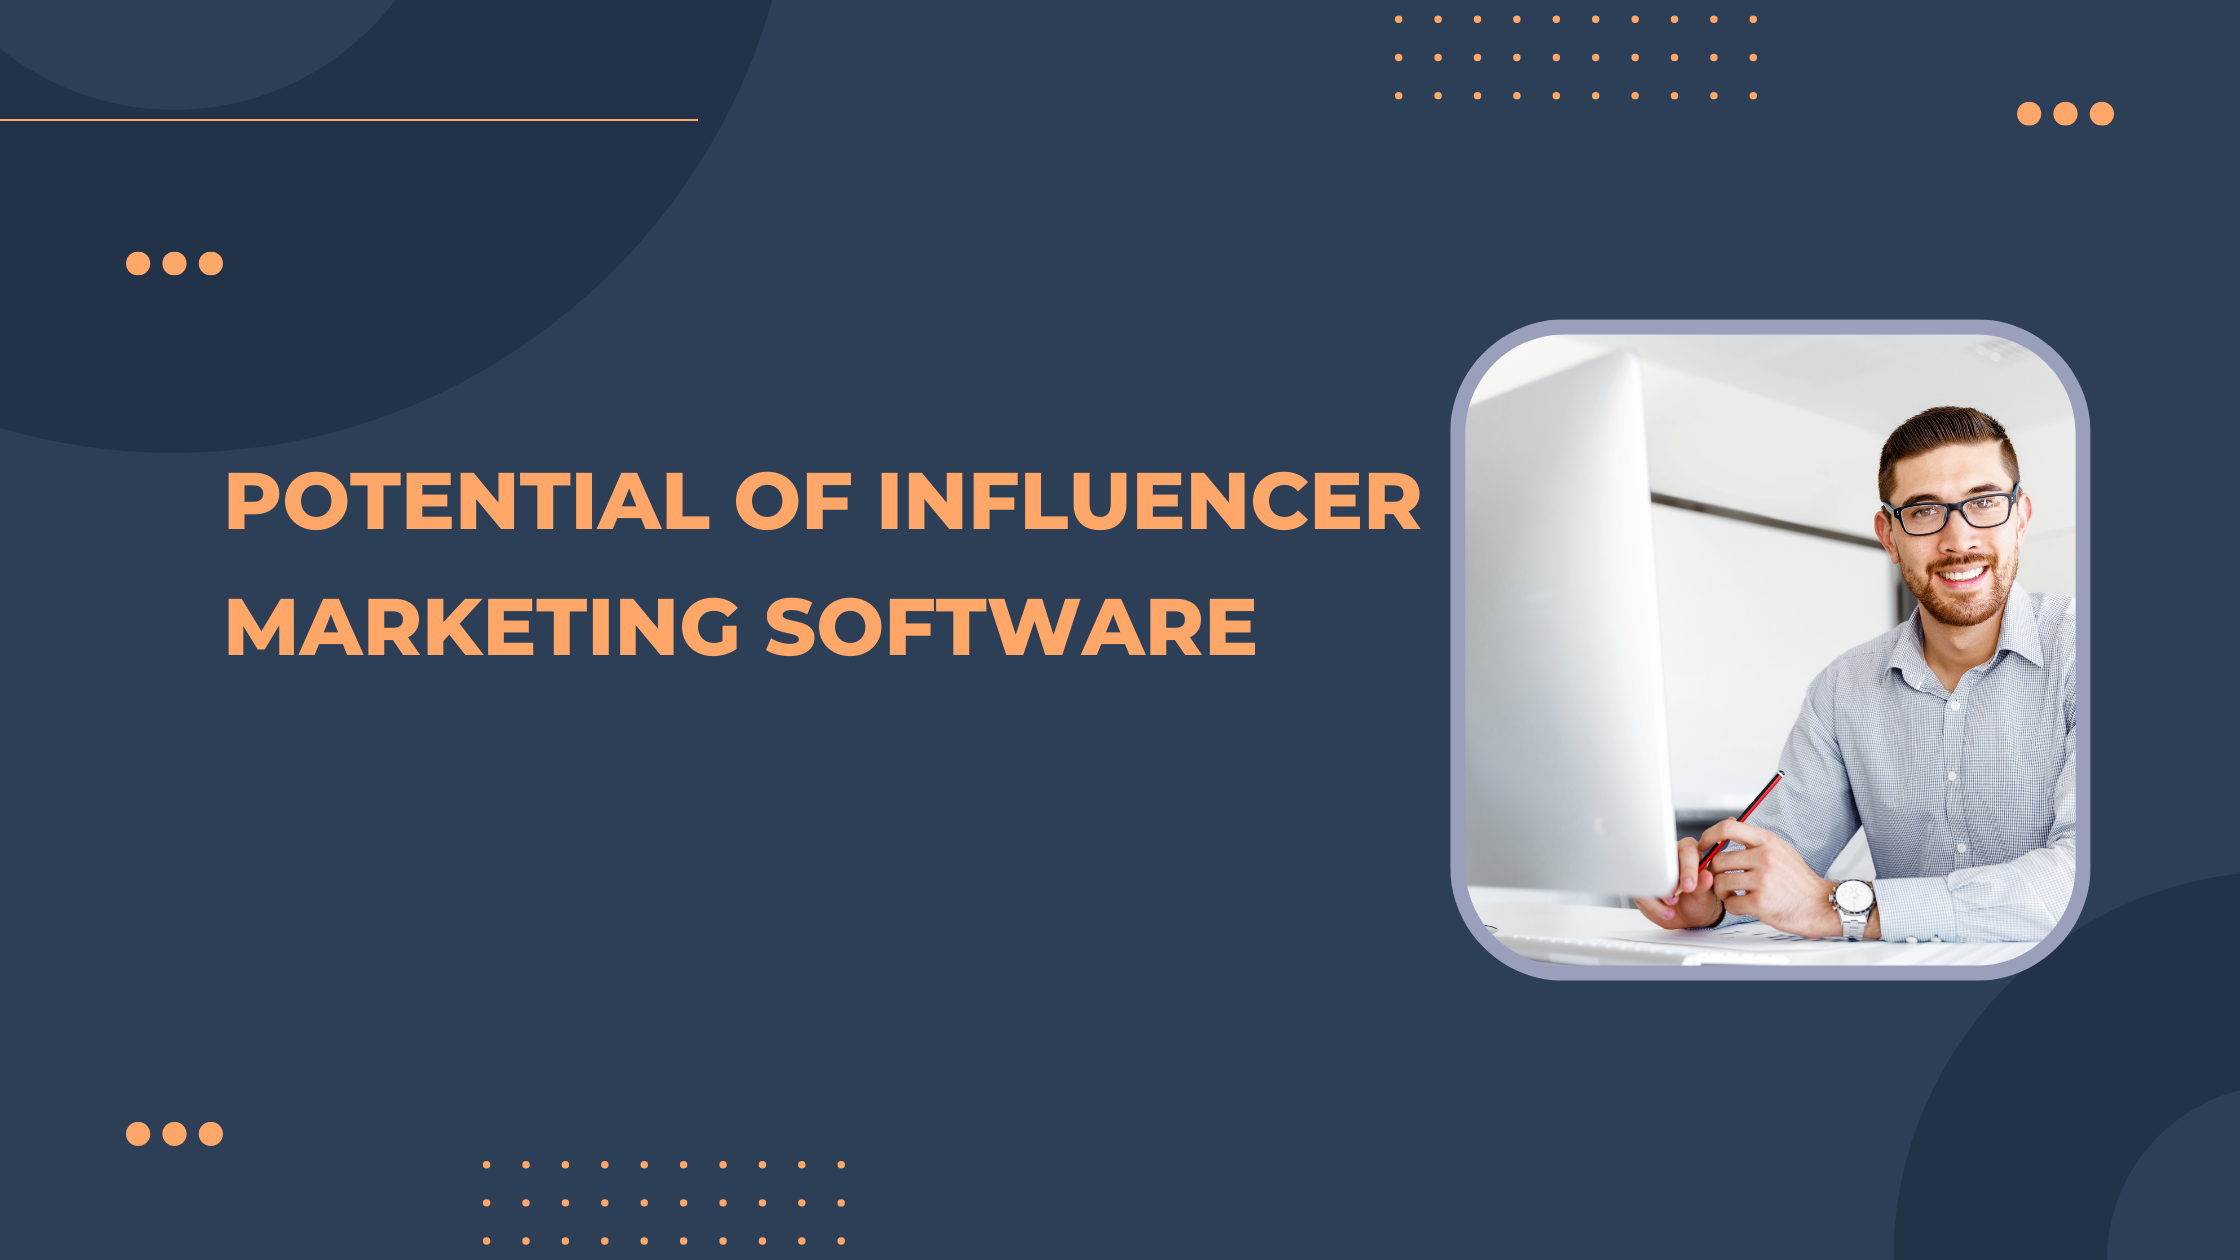 Potential of Influencer Marketing Software